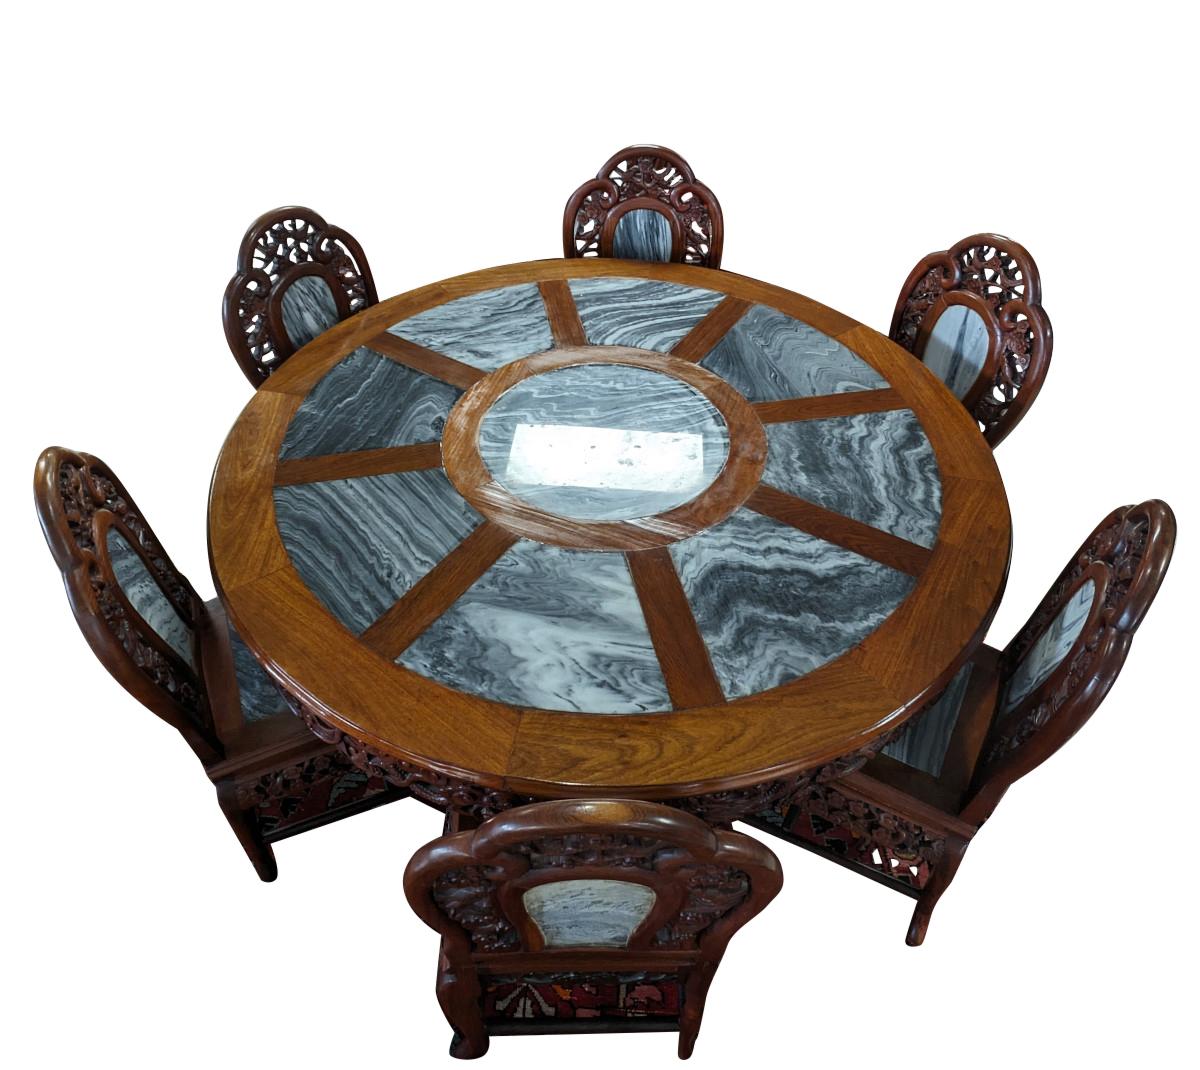 Vintage Stone Inlay Dining Table, 10 Chairs In Good Condition For Sale In Oakwood, GA